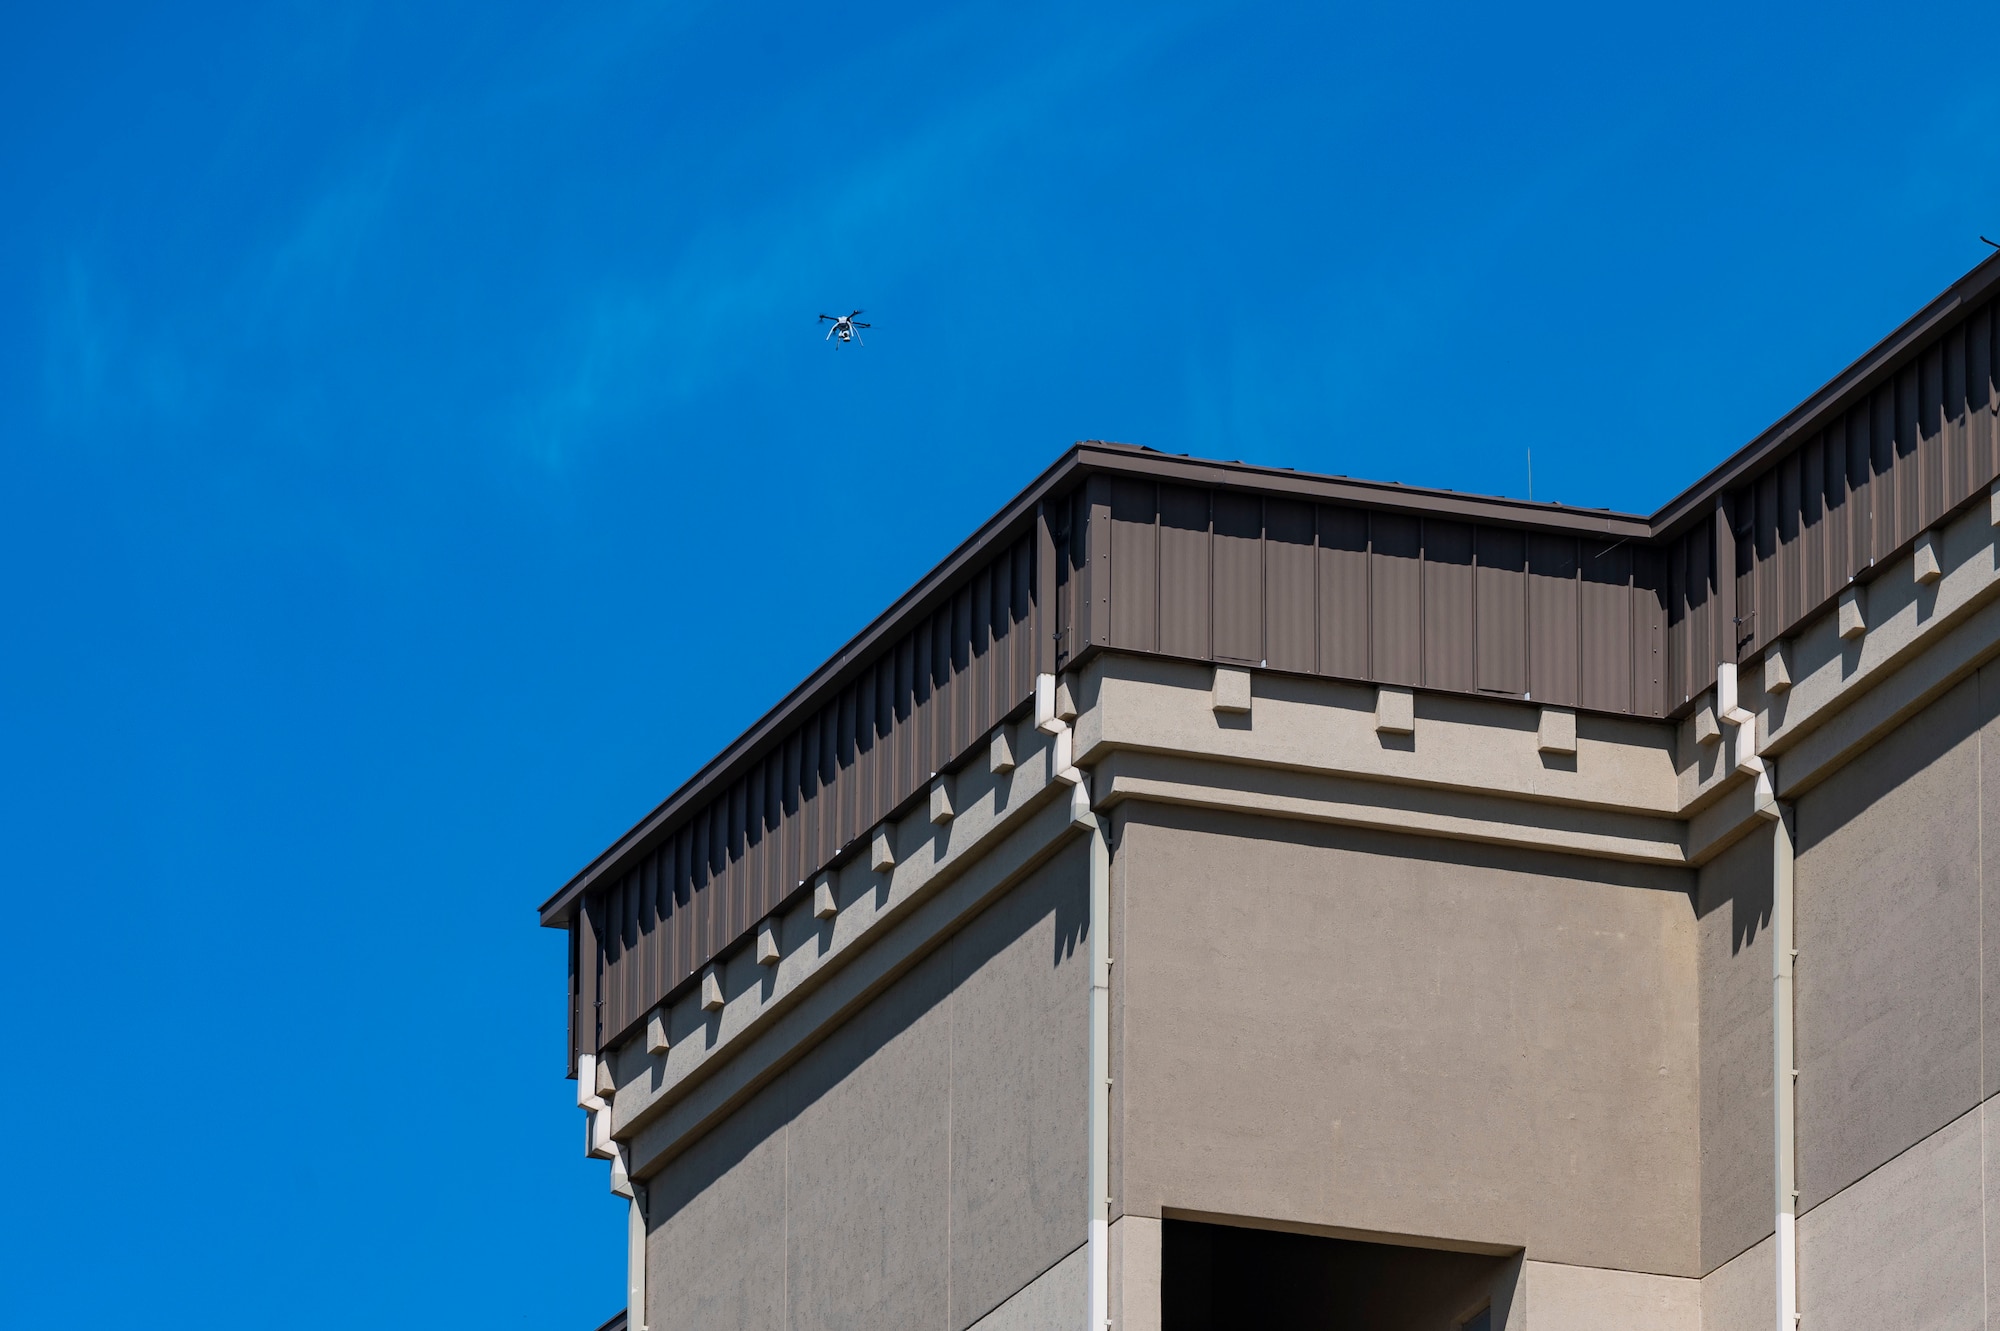 8th CES flies Small Unmanned Aircraft System to inspect dorm rooftops.